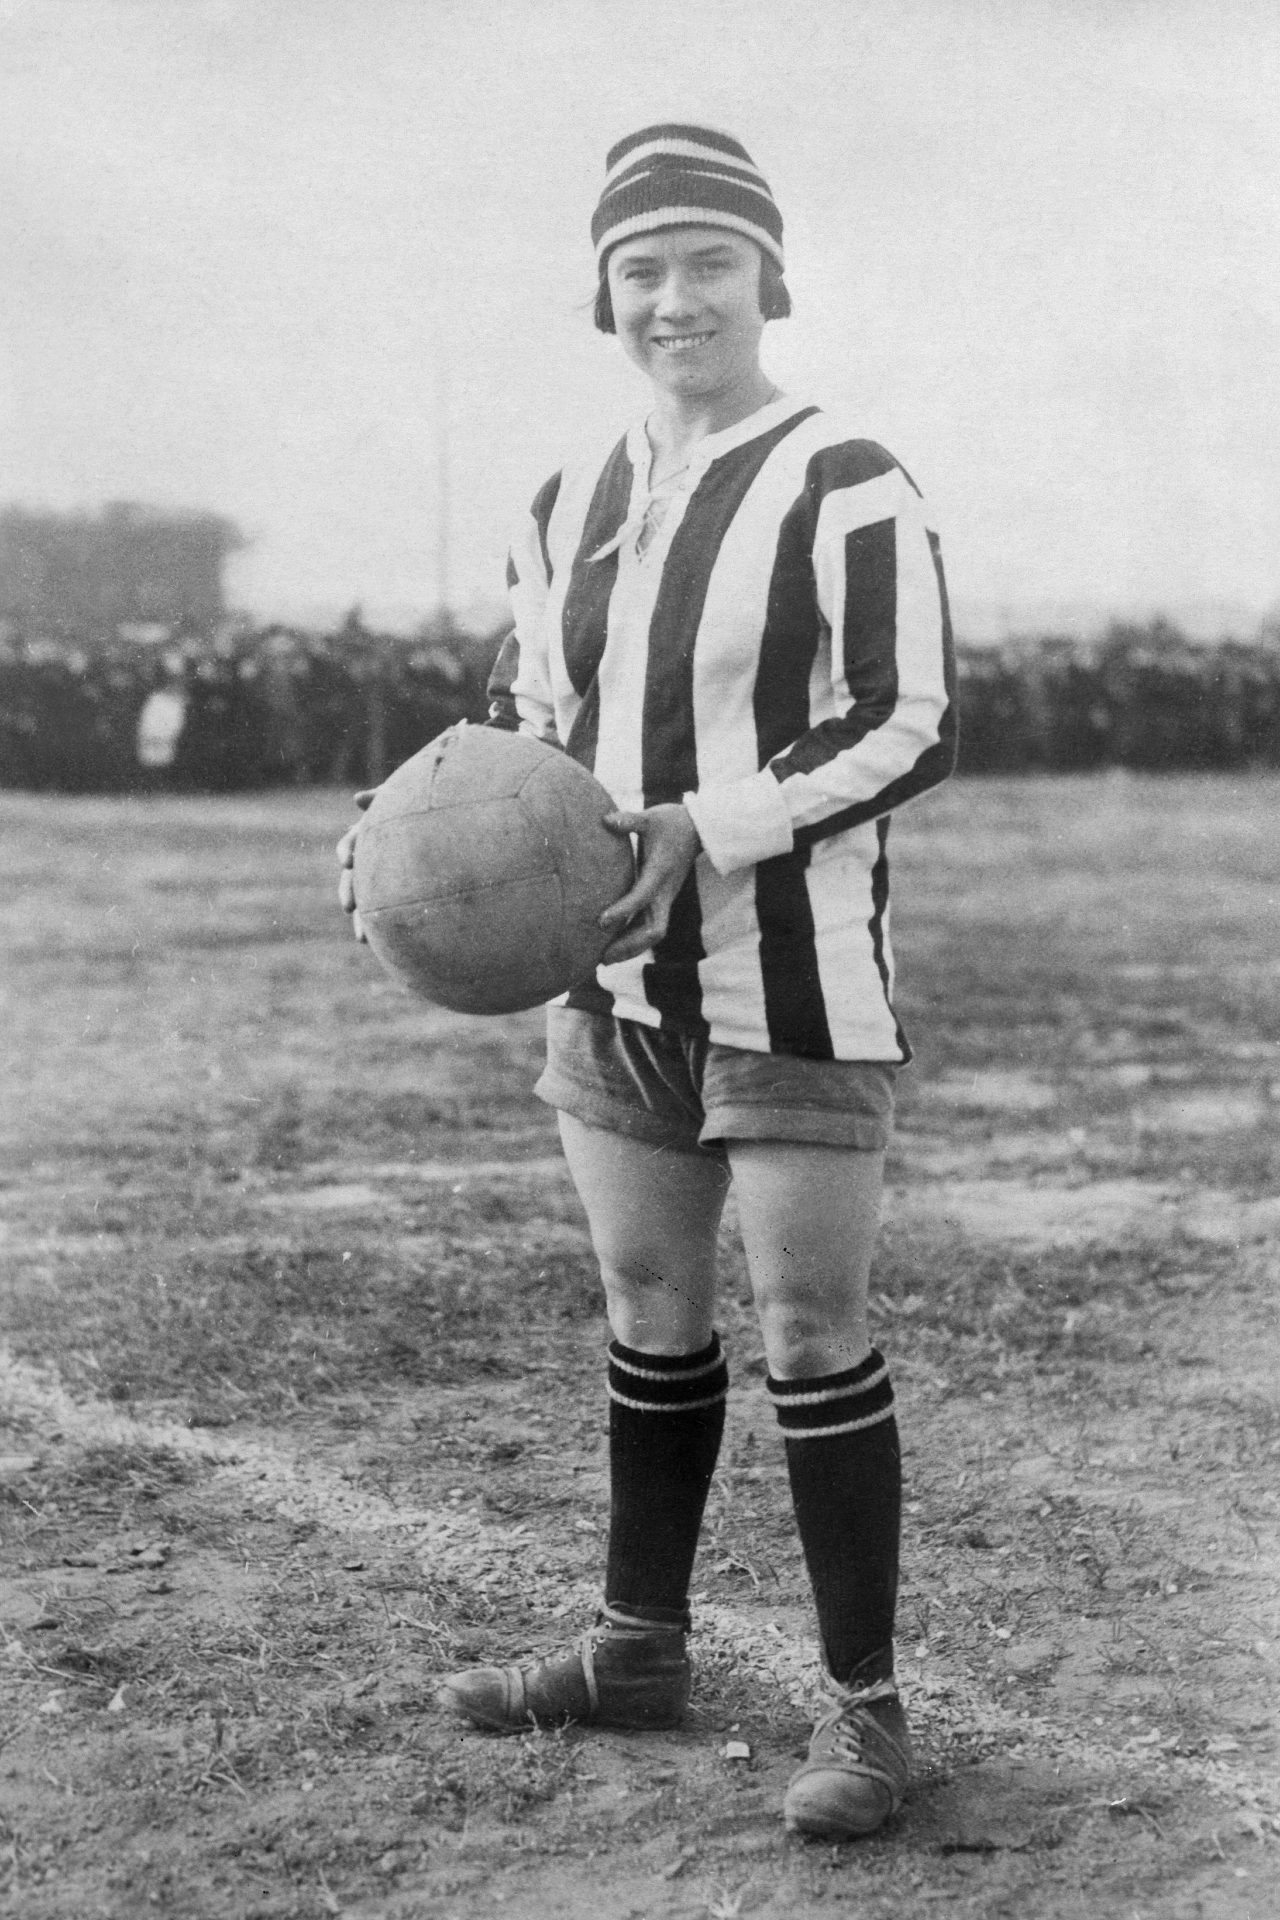 English women's soccer in the 20s